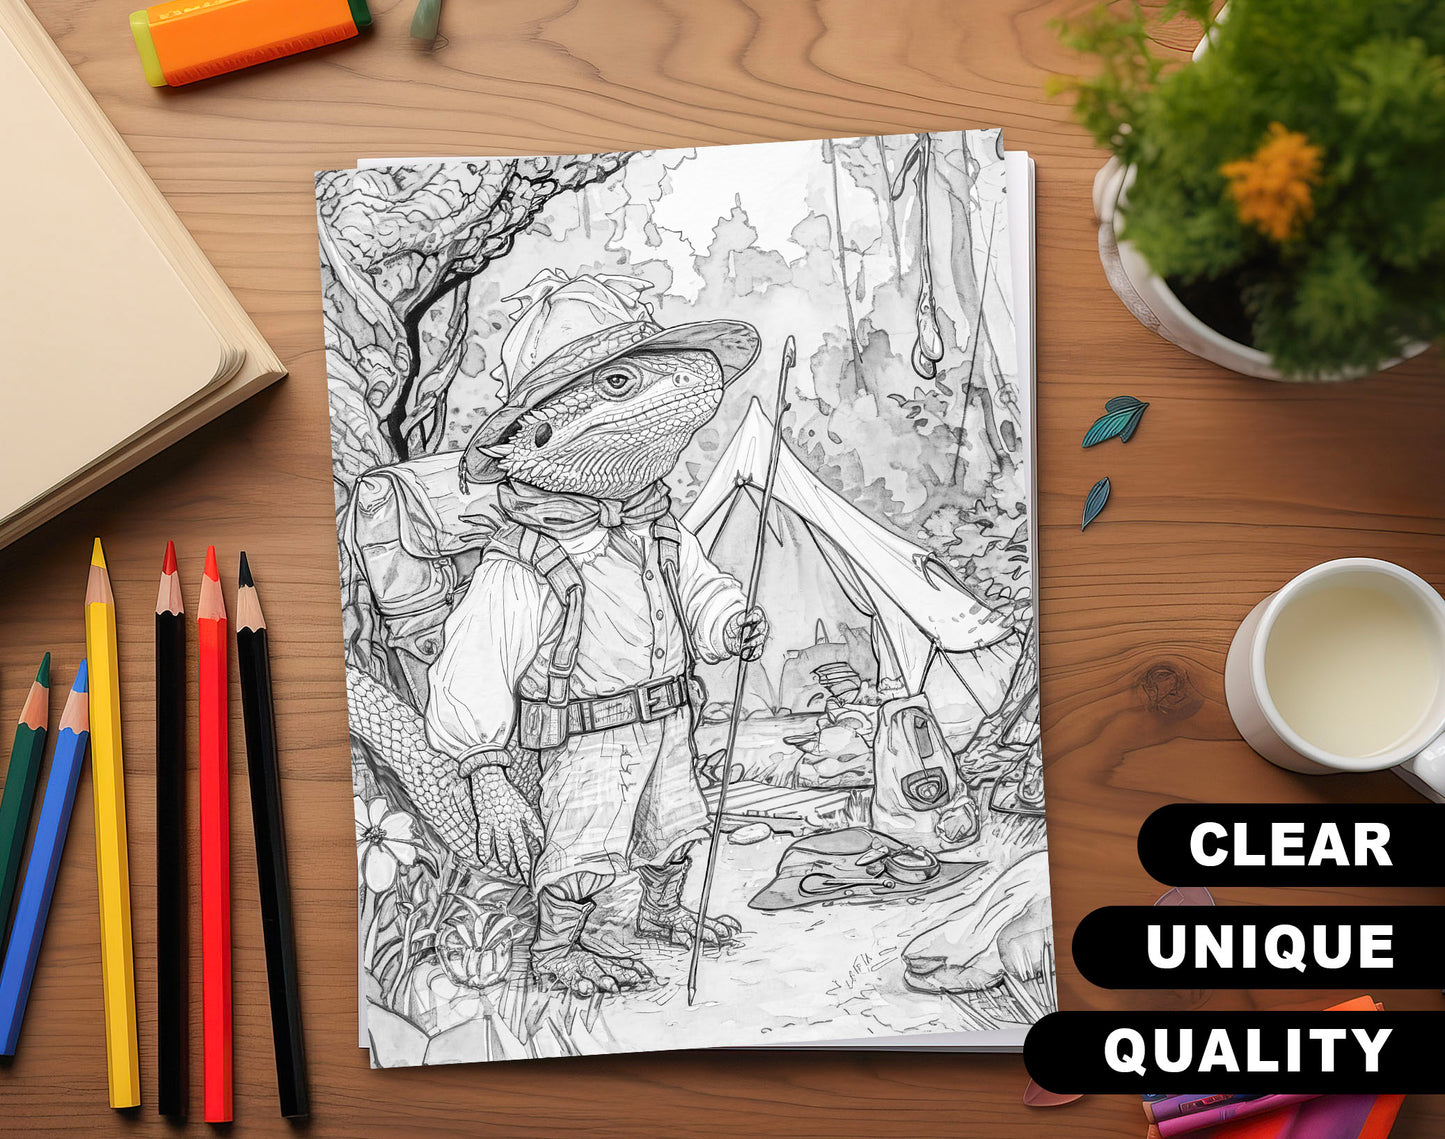 50 Daily Life Of Animal Grayscale Coloring Pages - Instant Download - Printable PDF Dark/Light